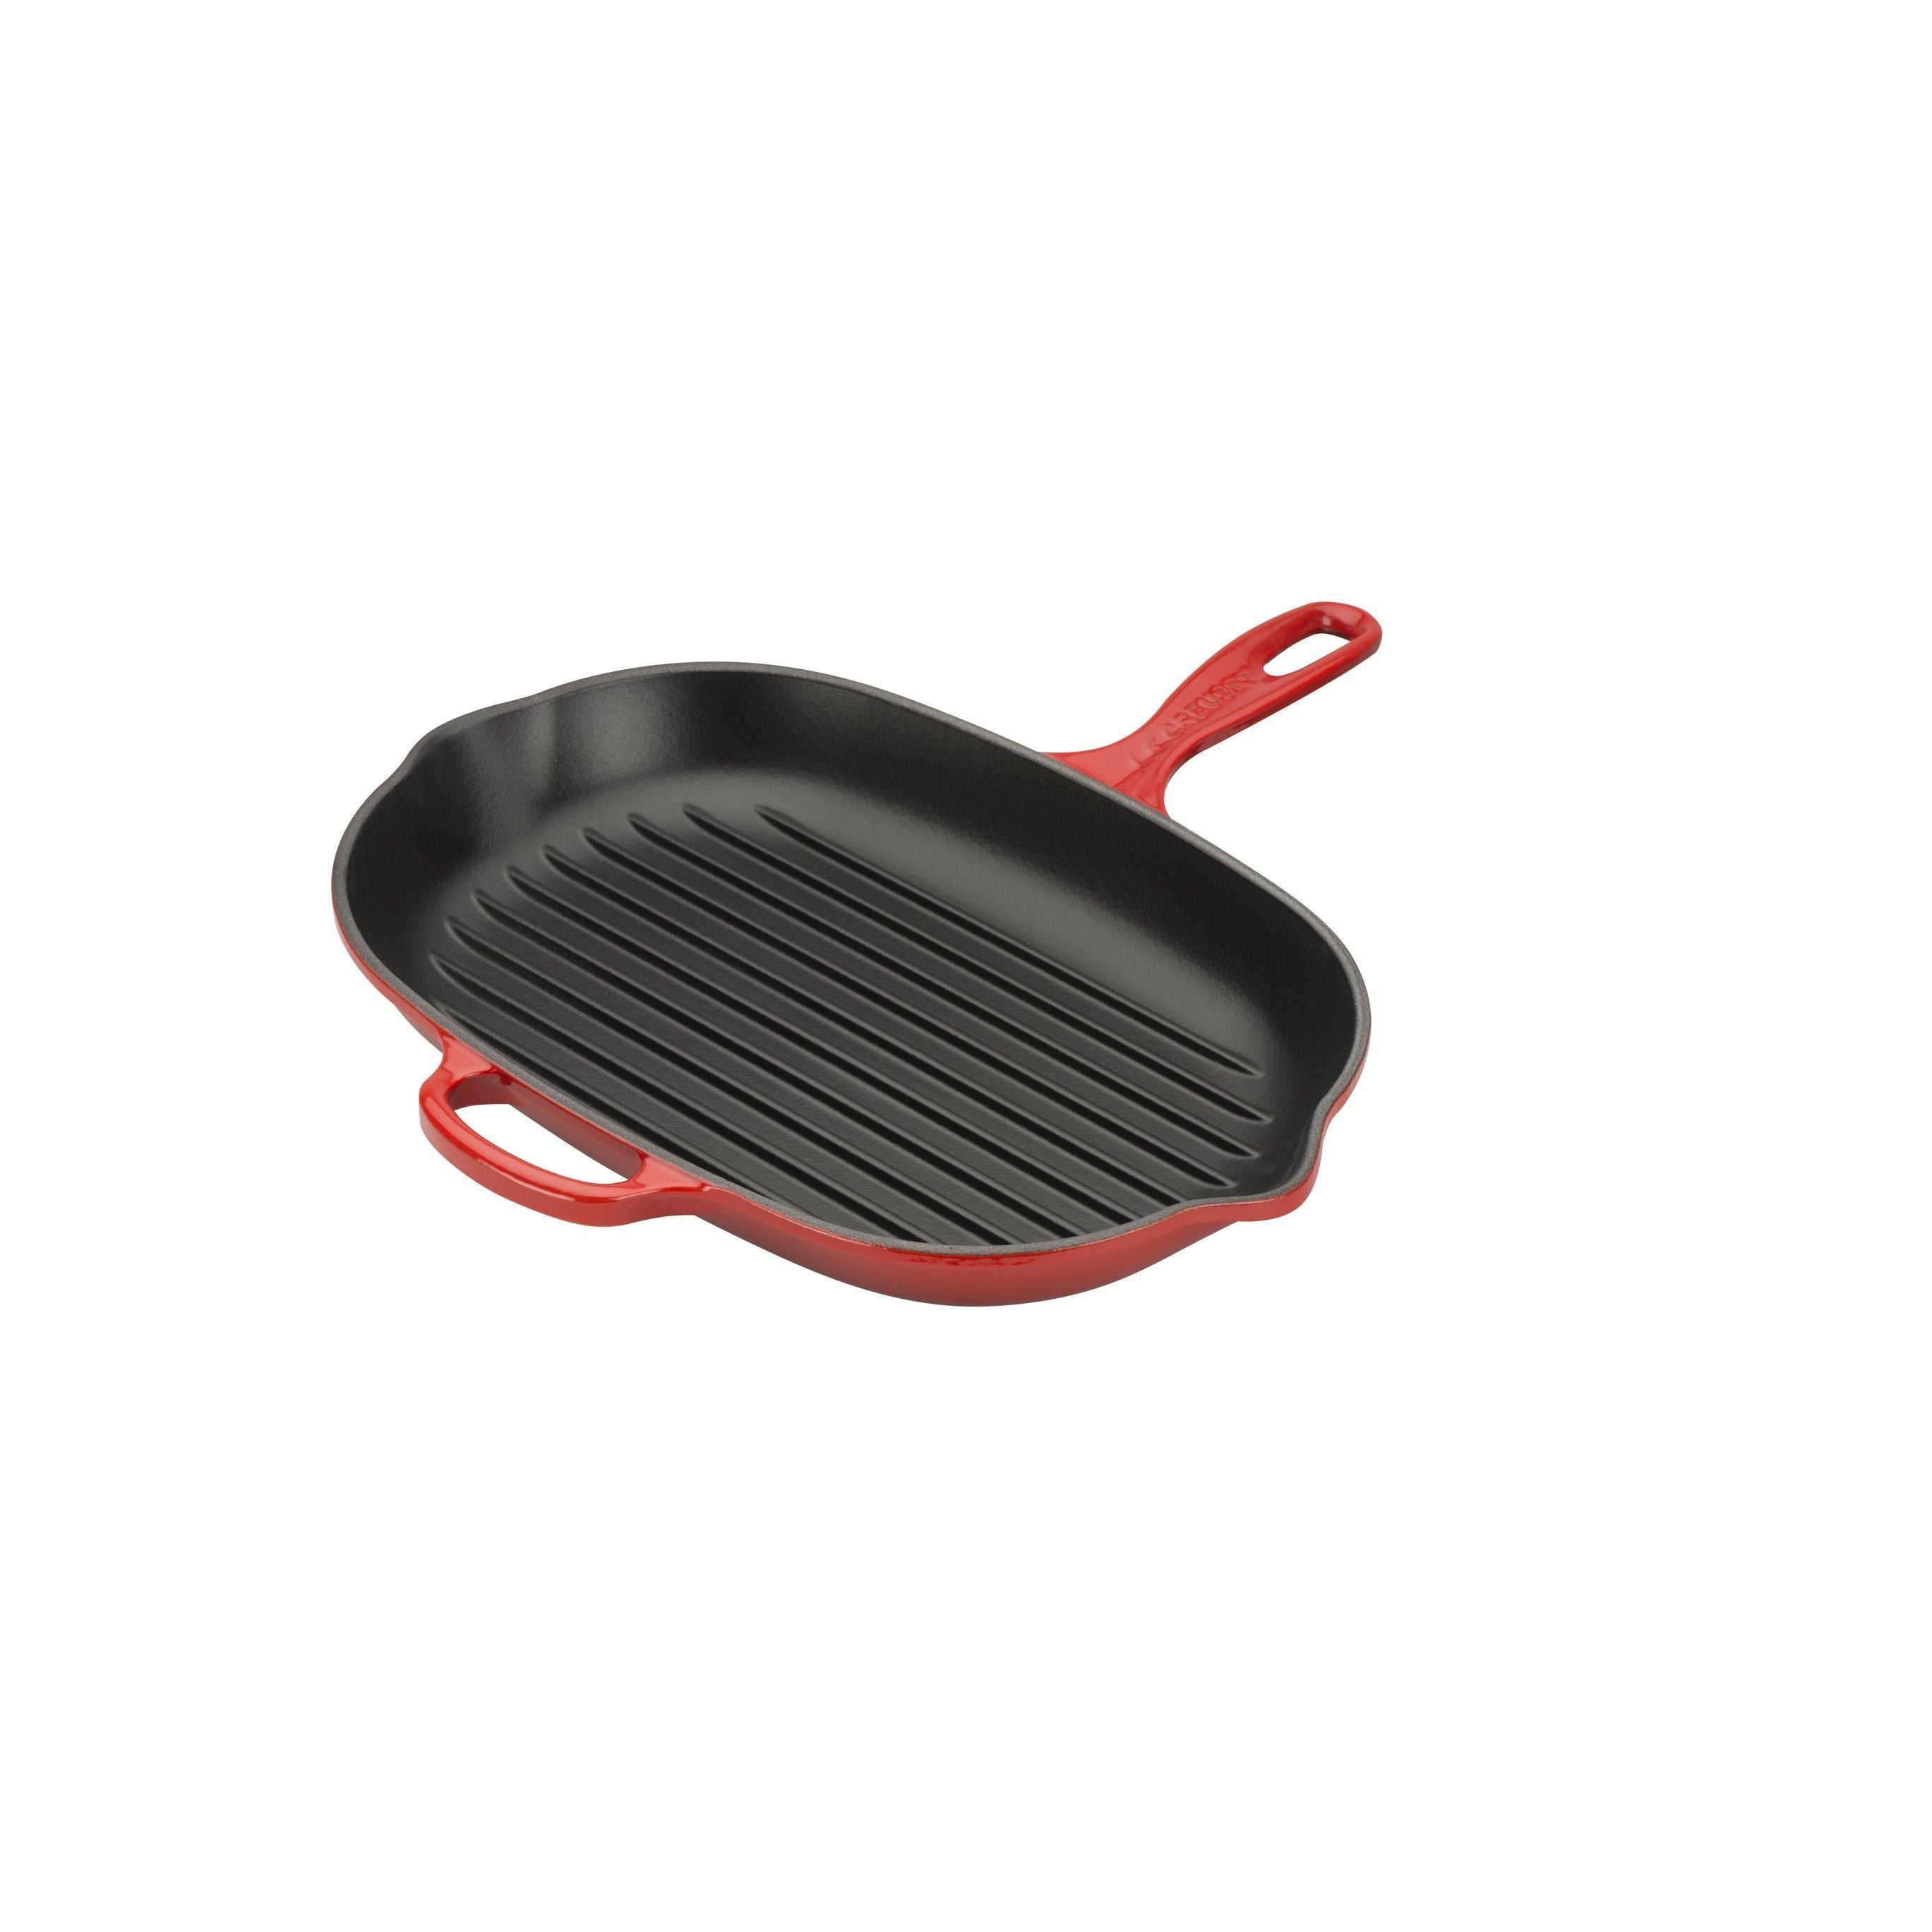 Le Creuset Nature Oval Grill Pan 32 Cm, Cherry Red